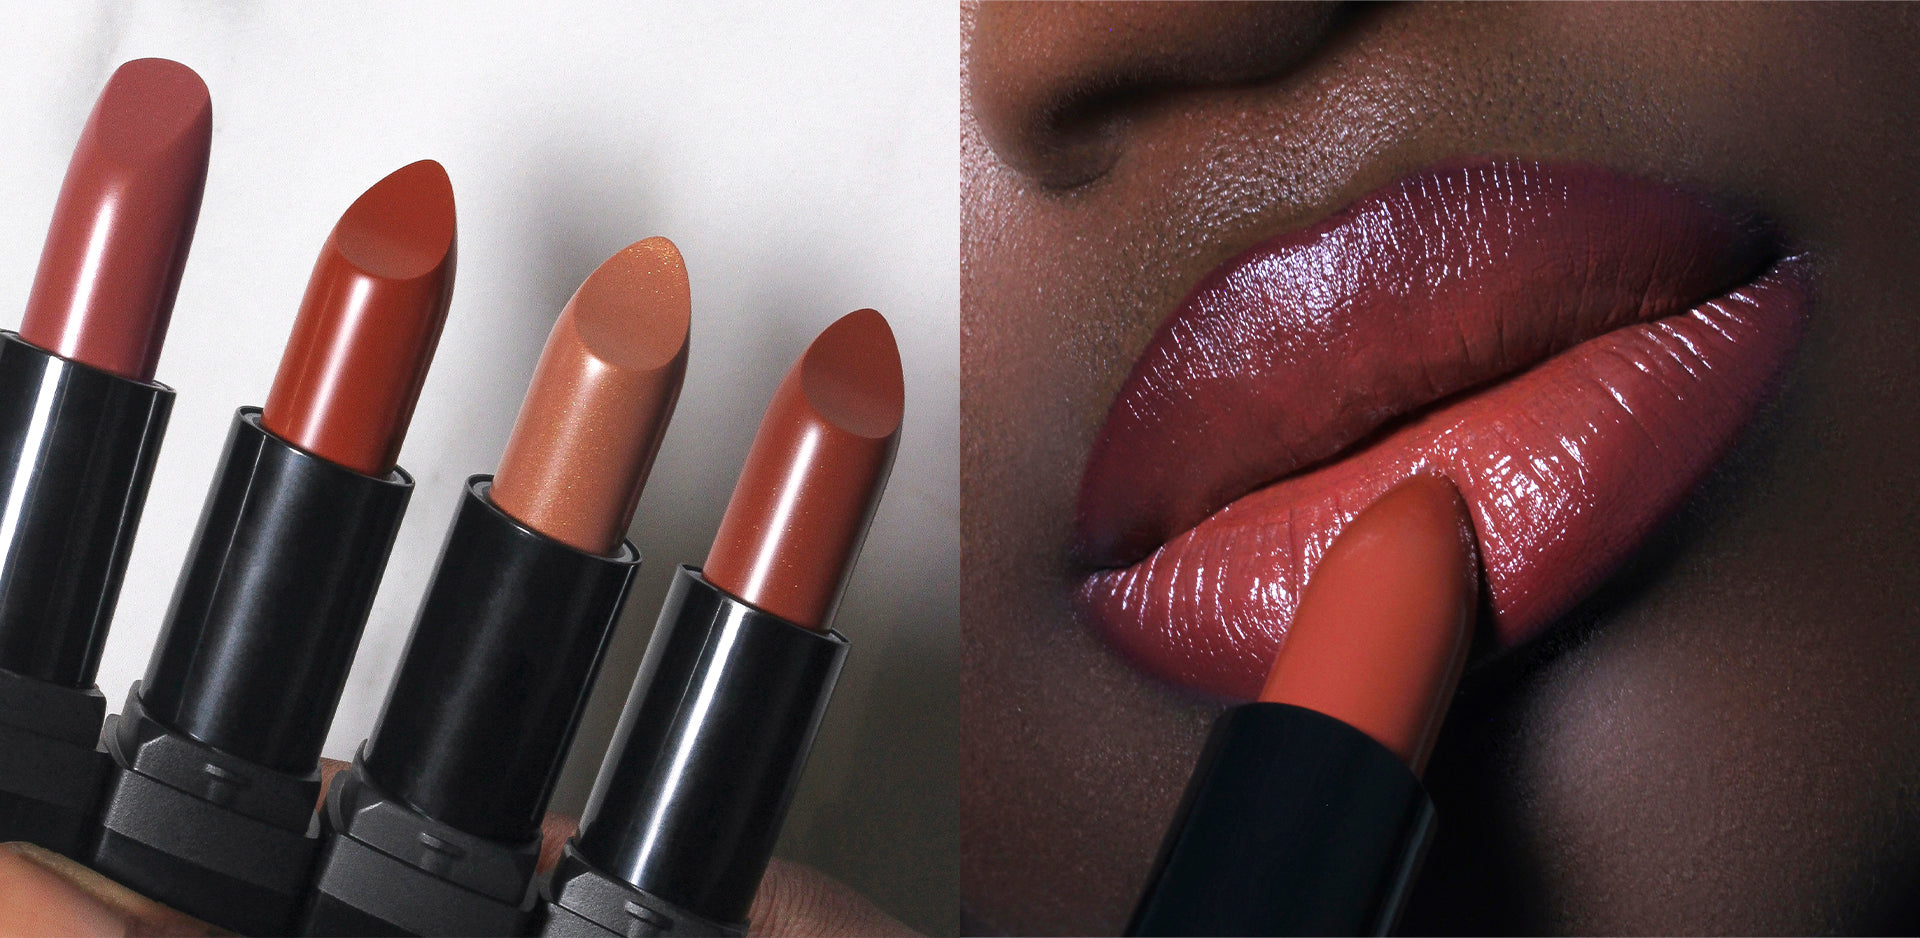 FIND THE BEST NUDE LIPSTICK FOR YOU